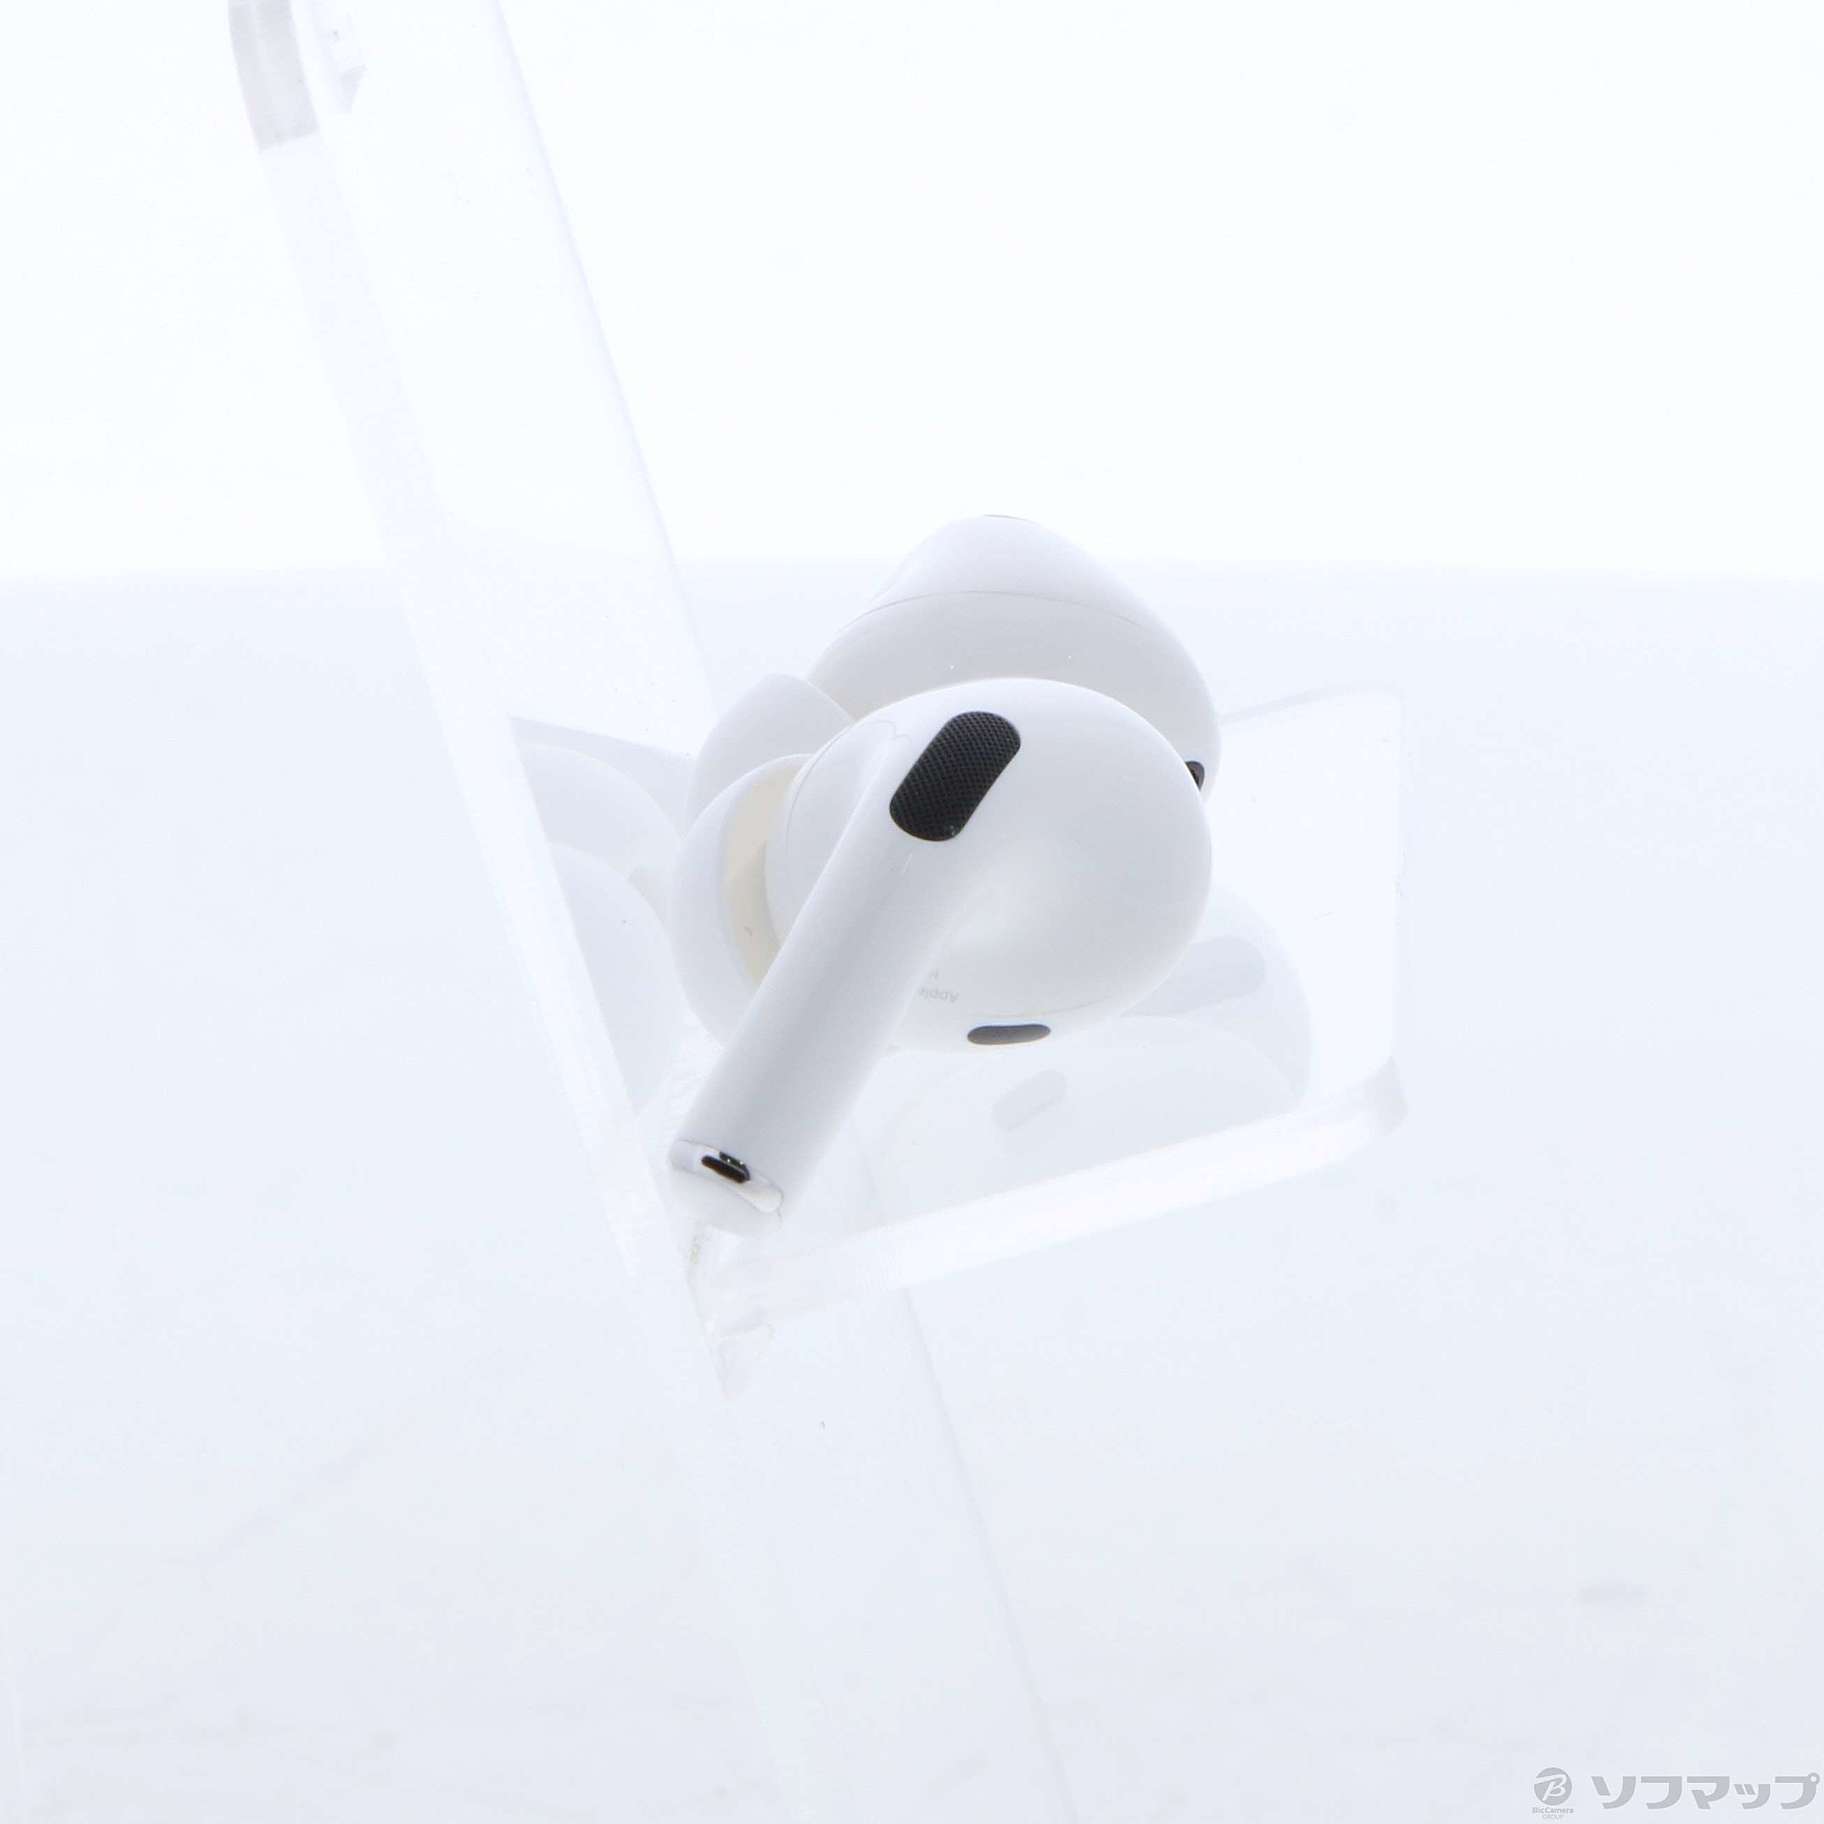 Airpods pro 第1世代　USED 刻印あり